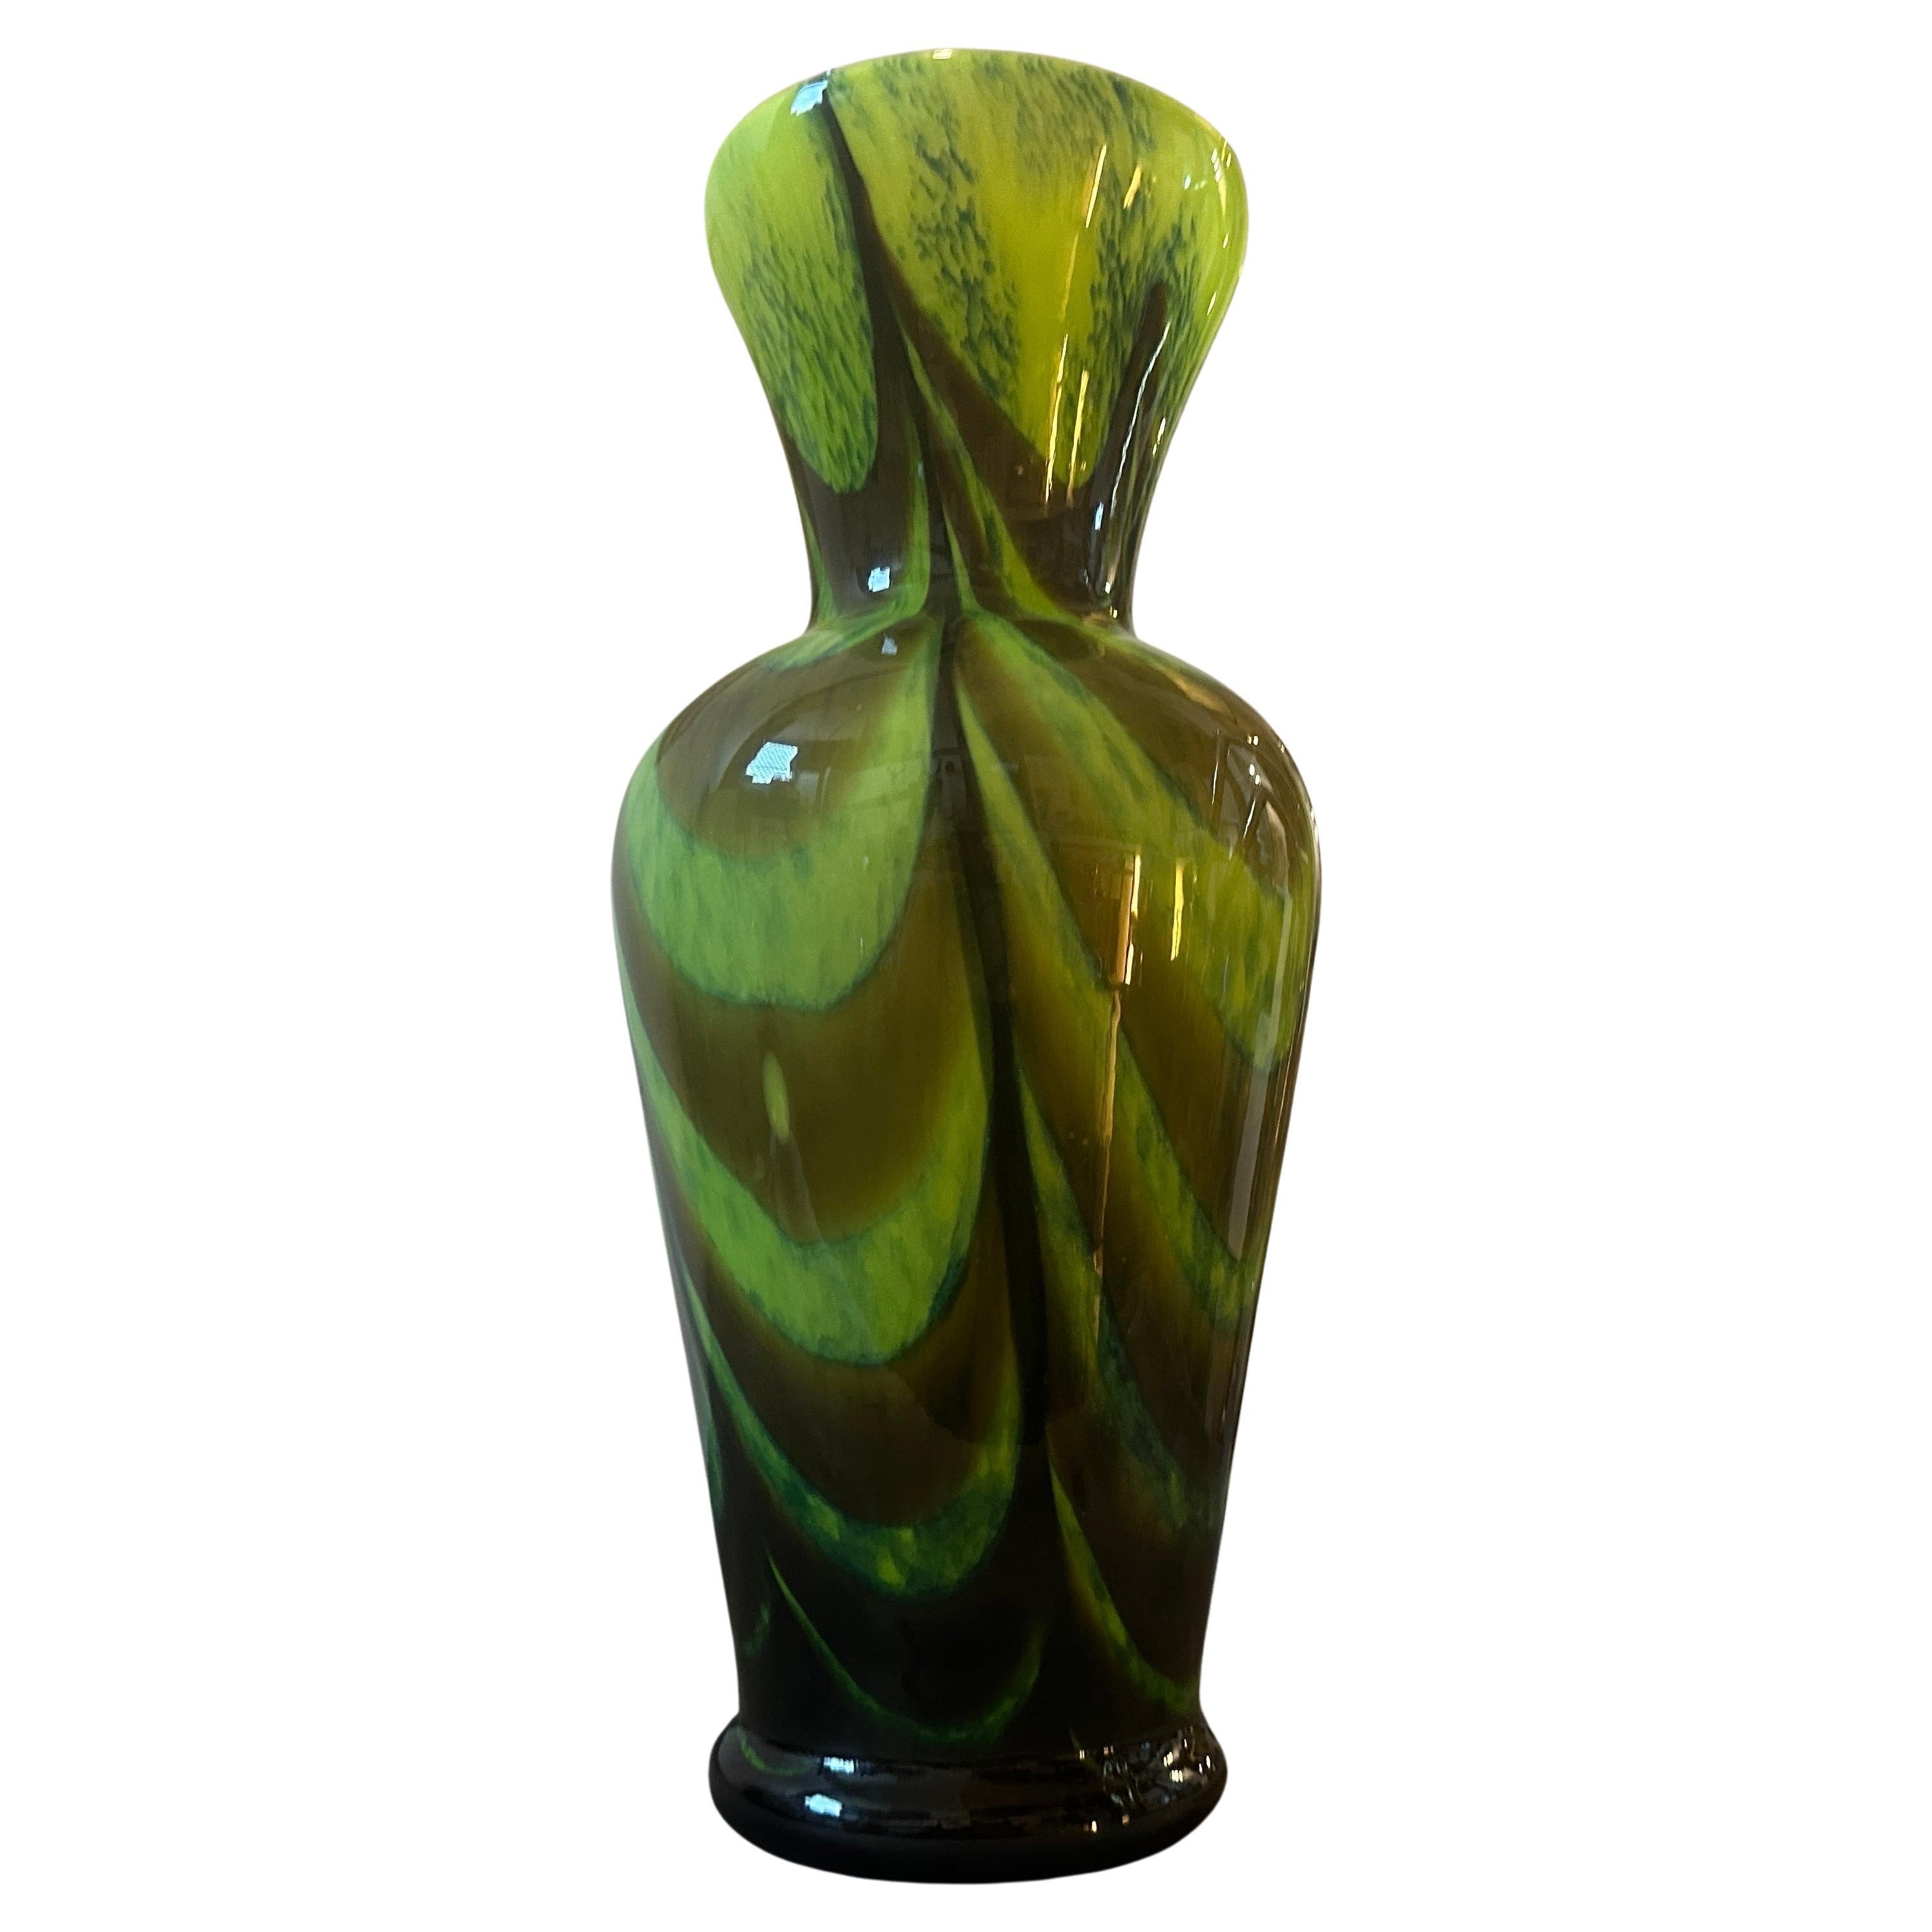 A perfect condition opaline glass vase designed and manufactured in Italy by Opaline Florence. The vase exudes a sense of artistic flair and sophistication, characteristic of Carlo Moretti's work. The combination of opaline glass and the Space Age